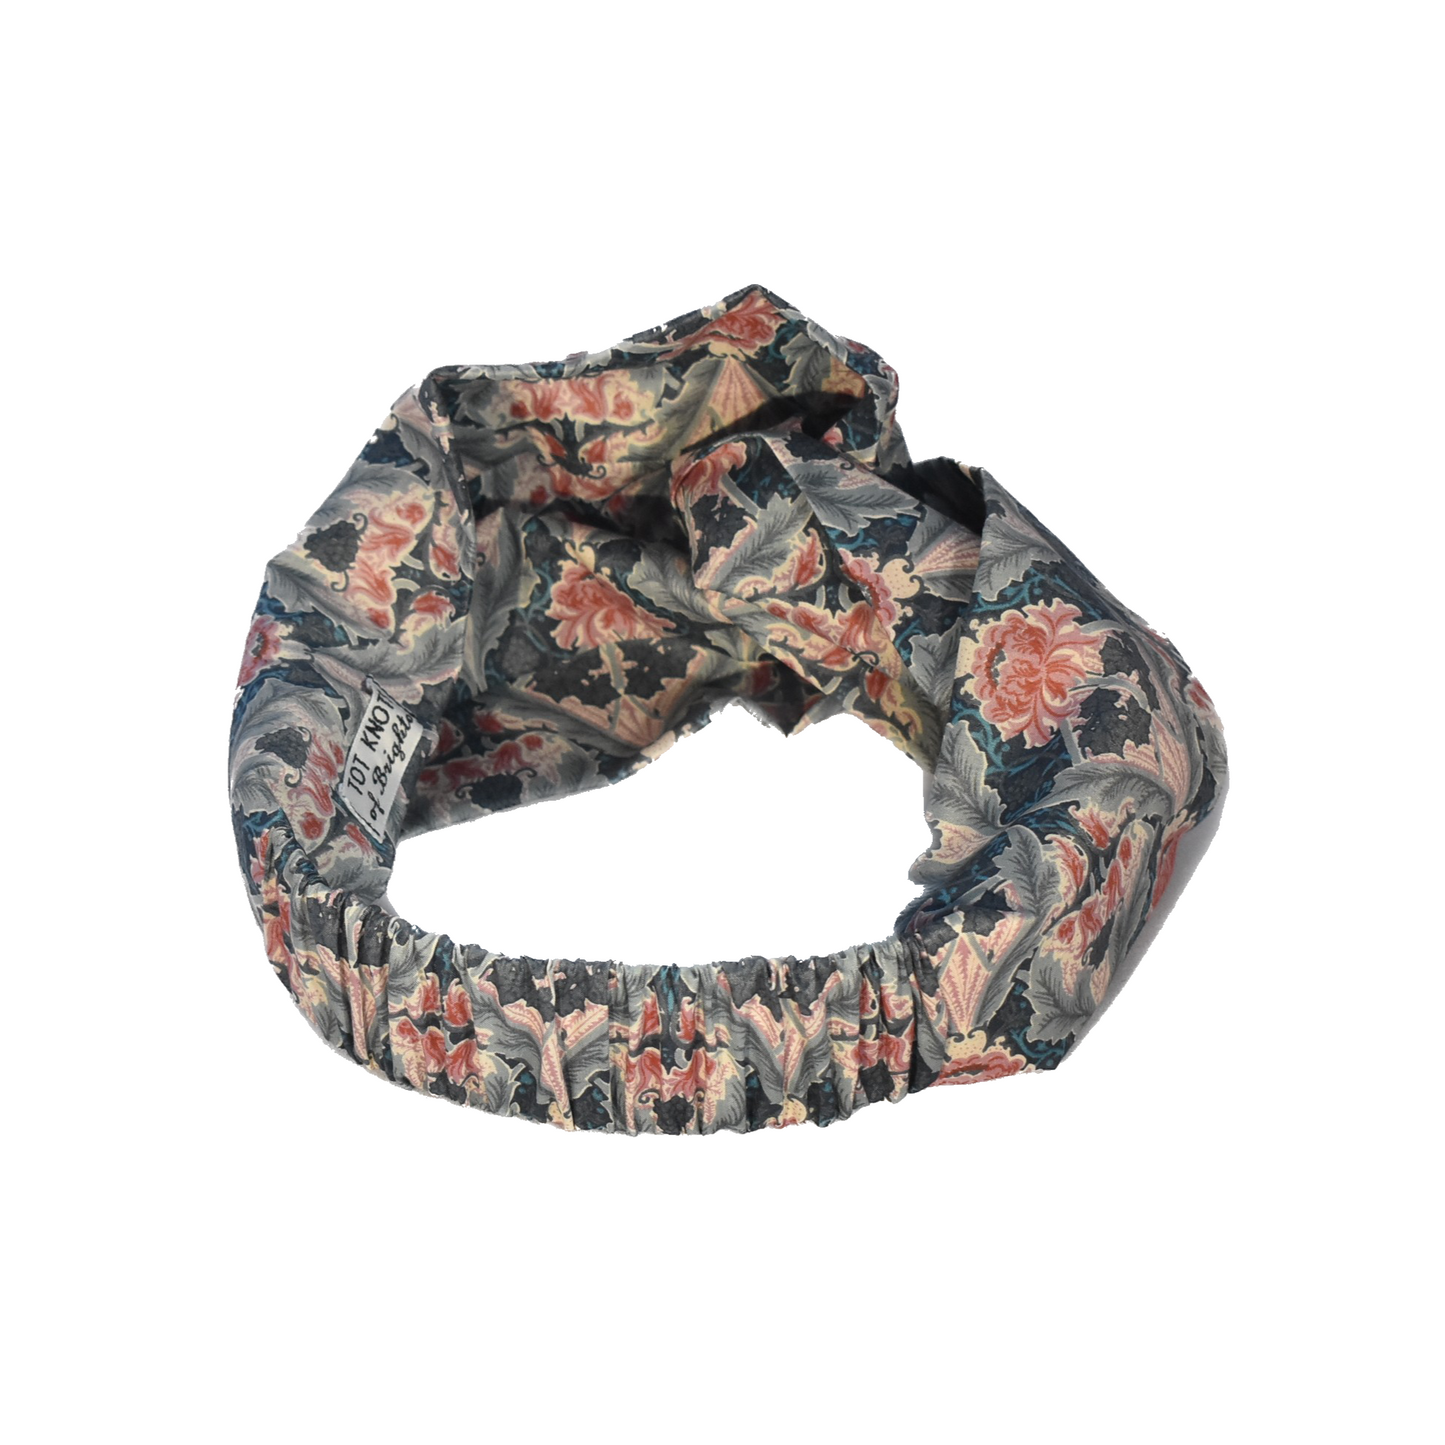 Kids Tot Knot Twisted hairband -Vintage Liberty of London Pink Peonie print